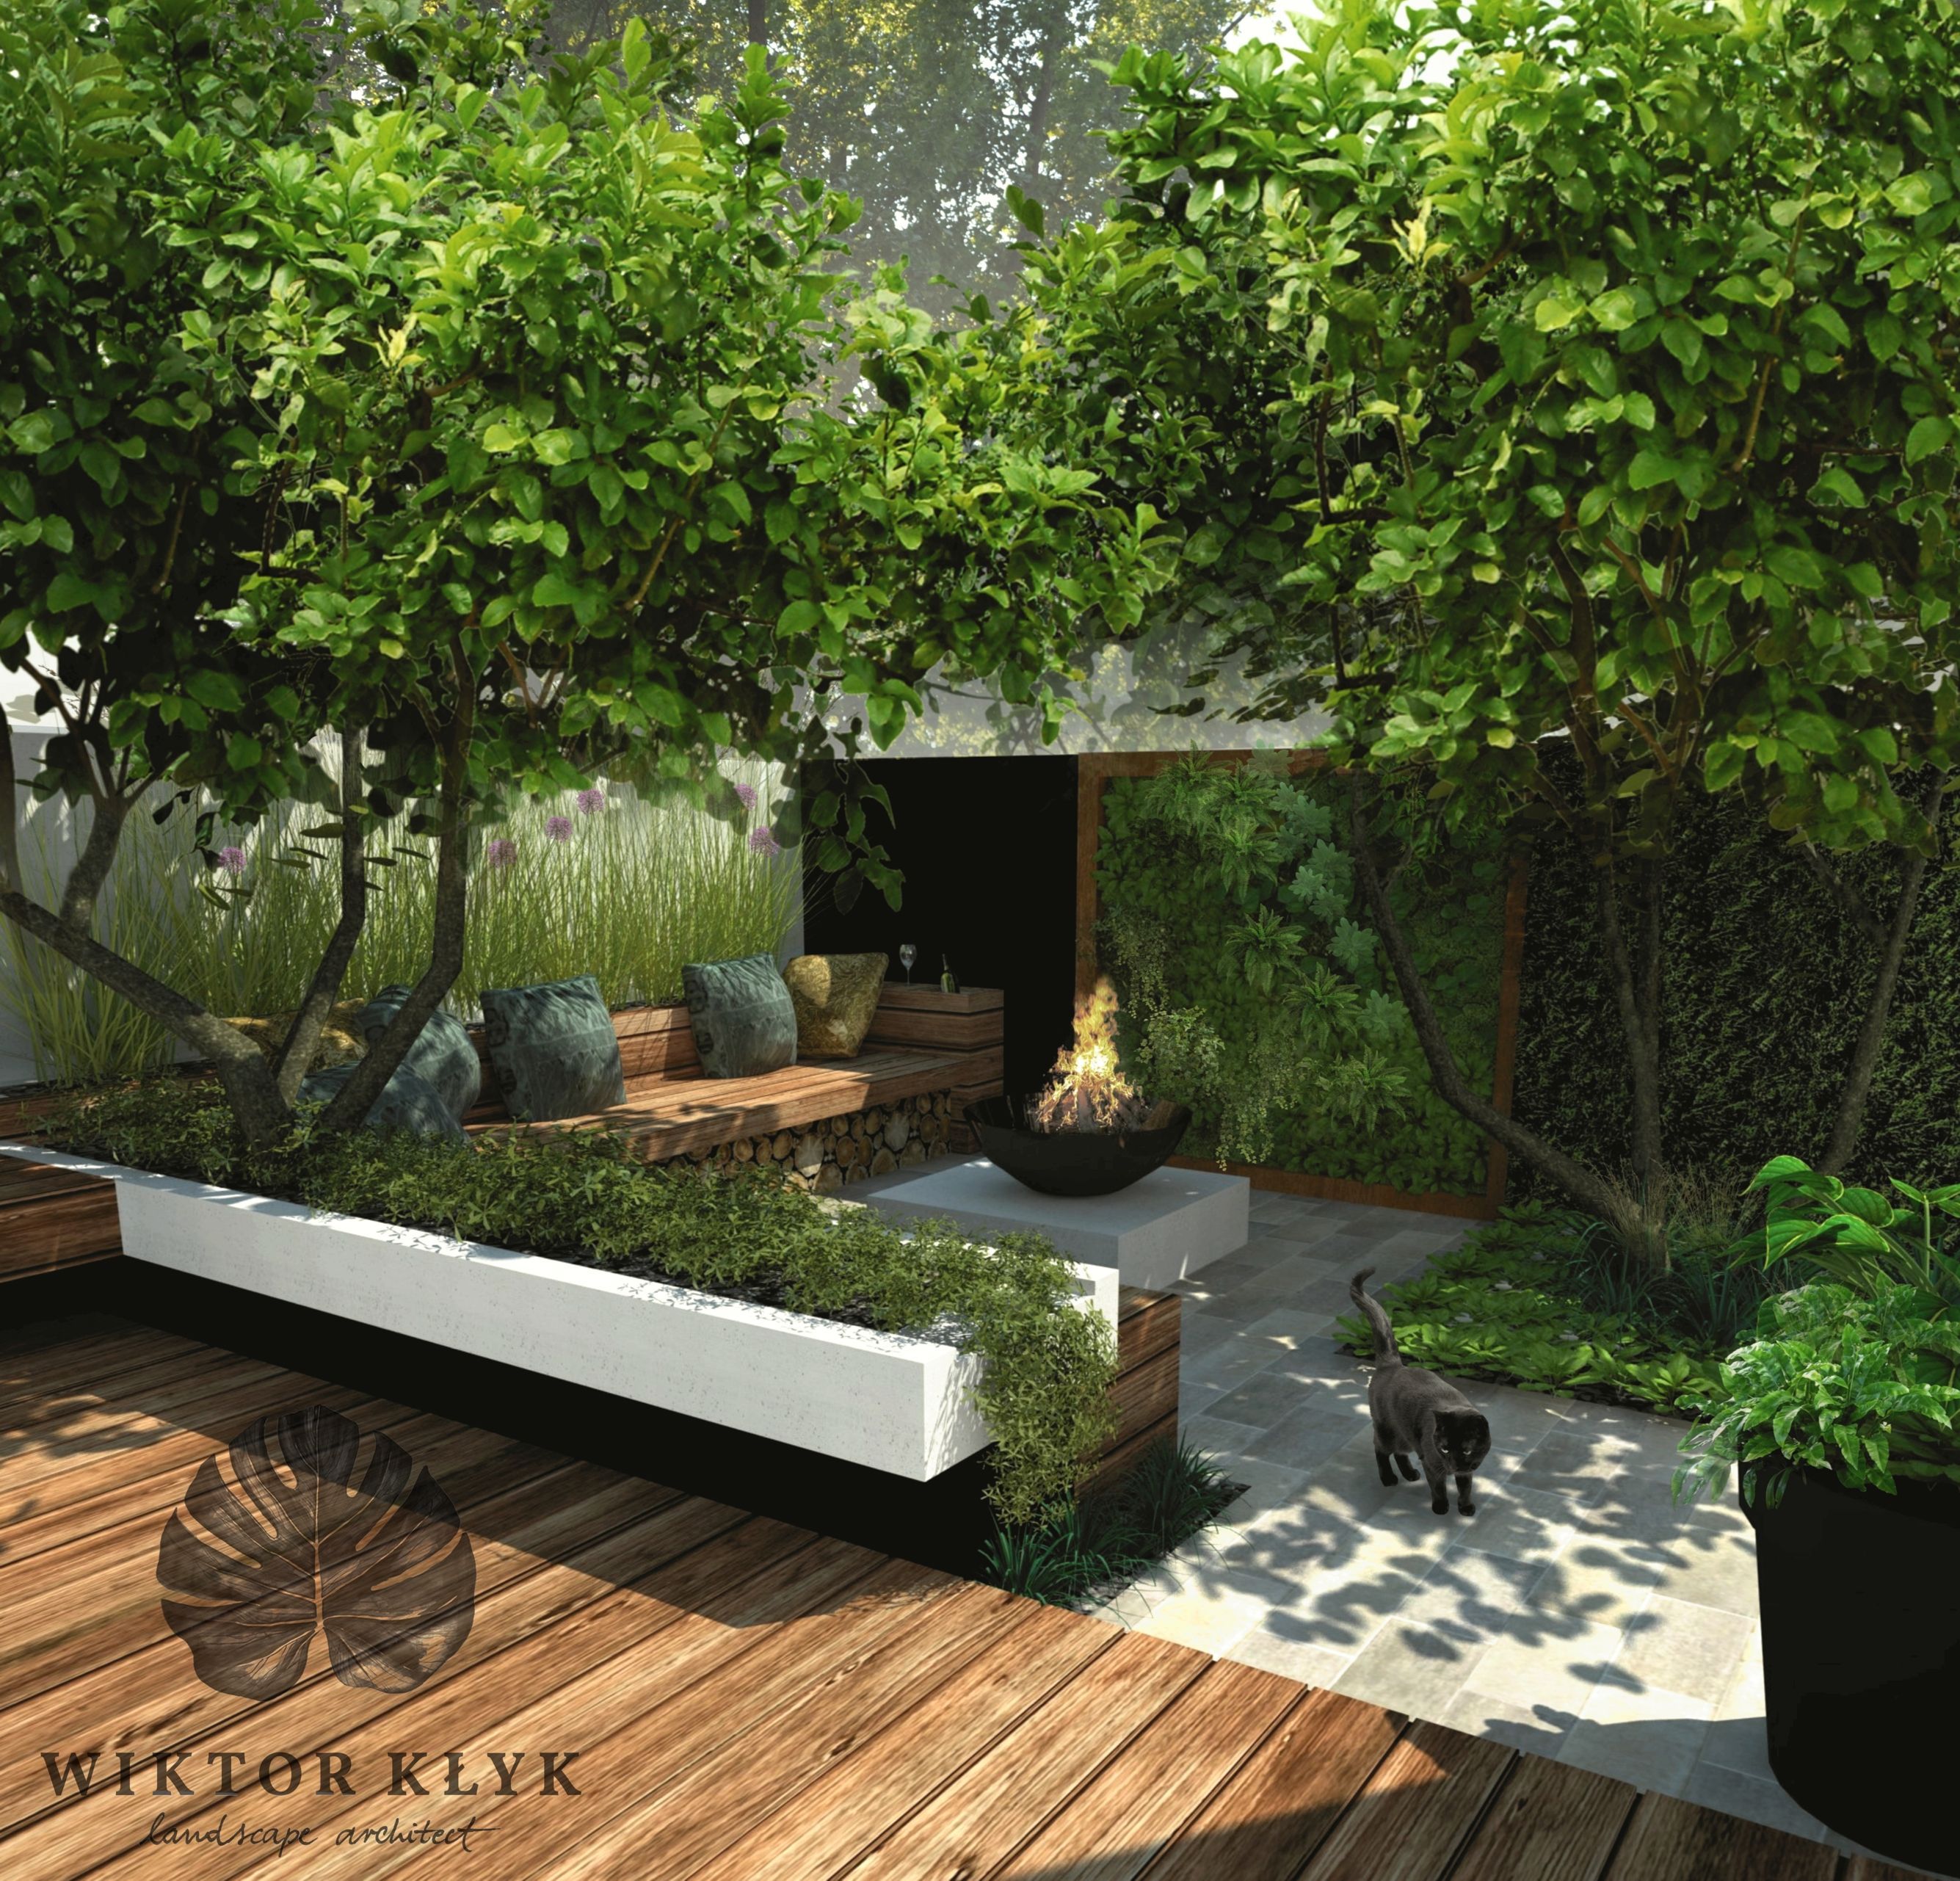 Small contemporary garden. Wonderful use of space incorporating shade, seating, heights creating different areas to enjoy, all